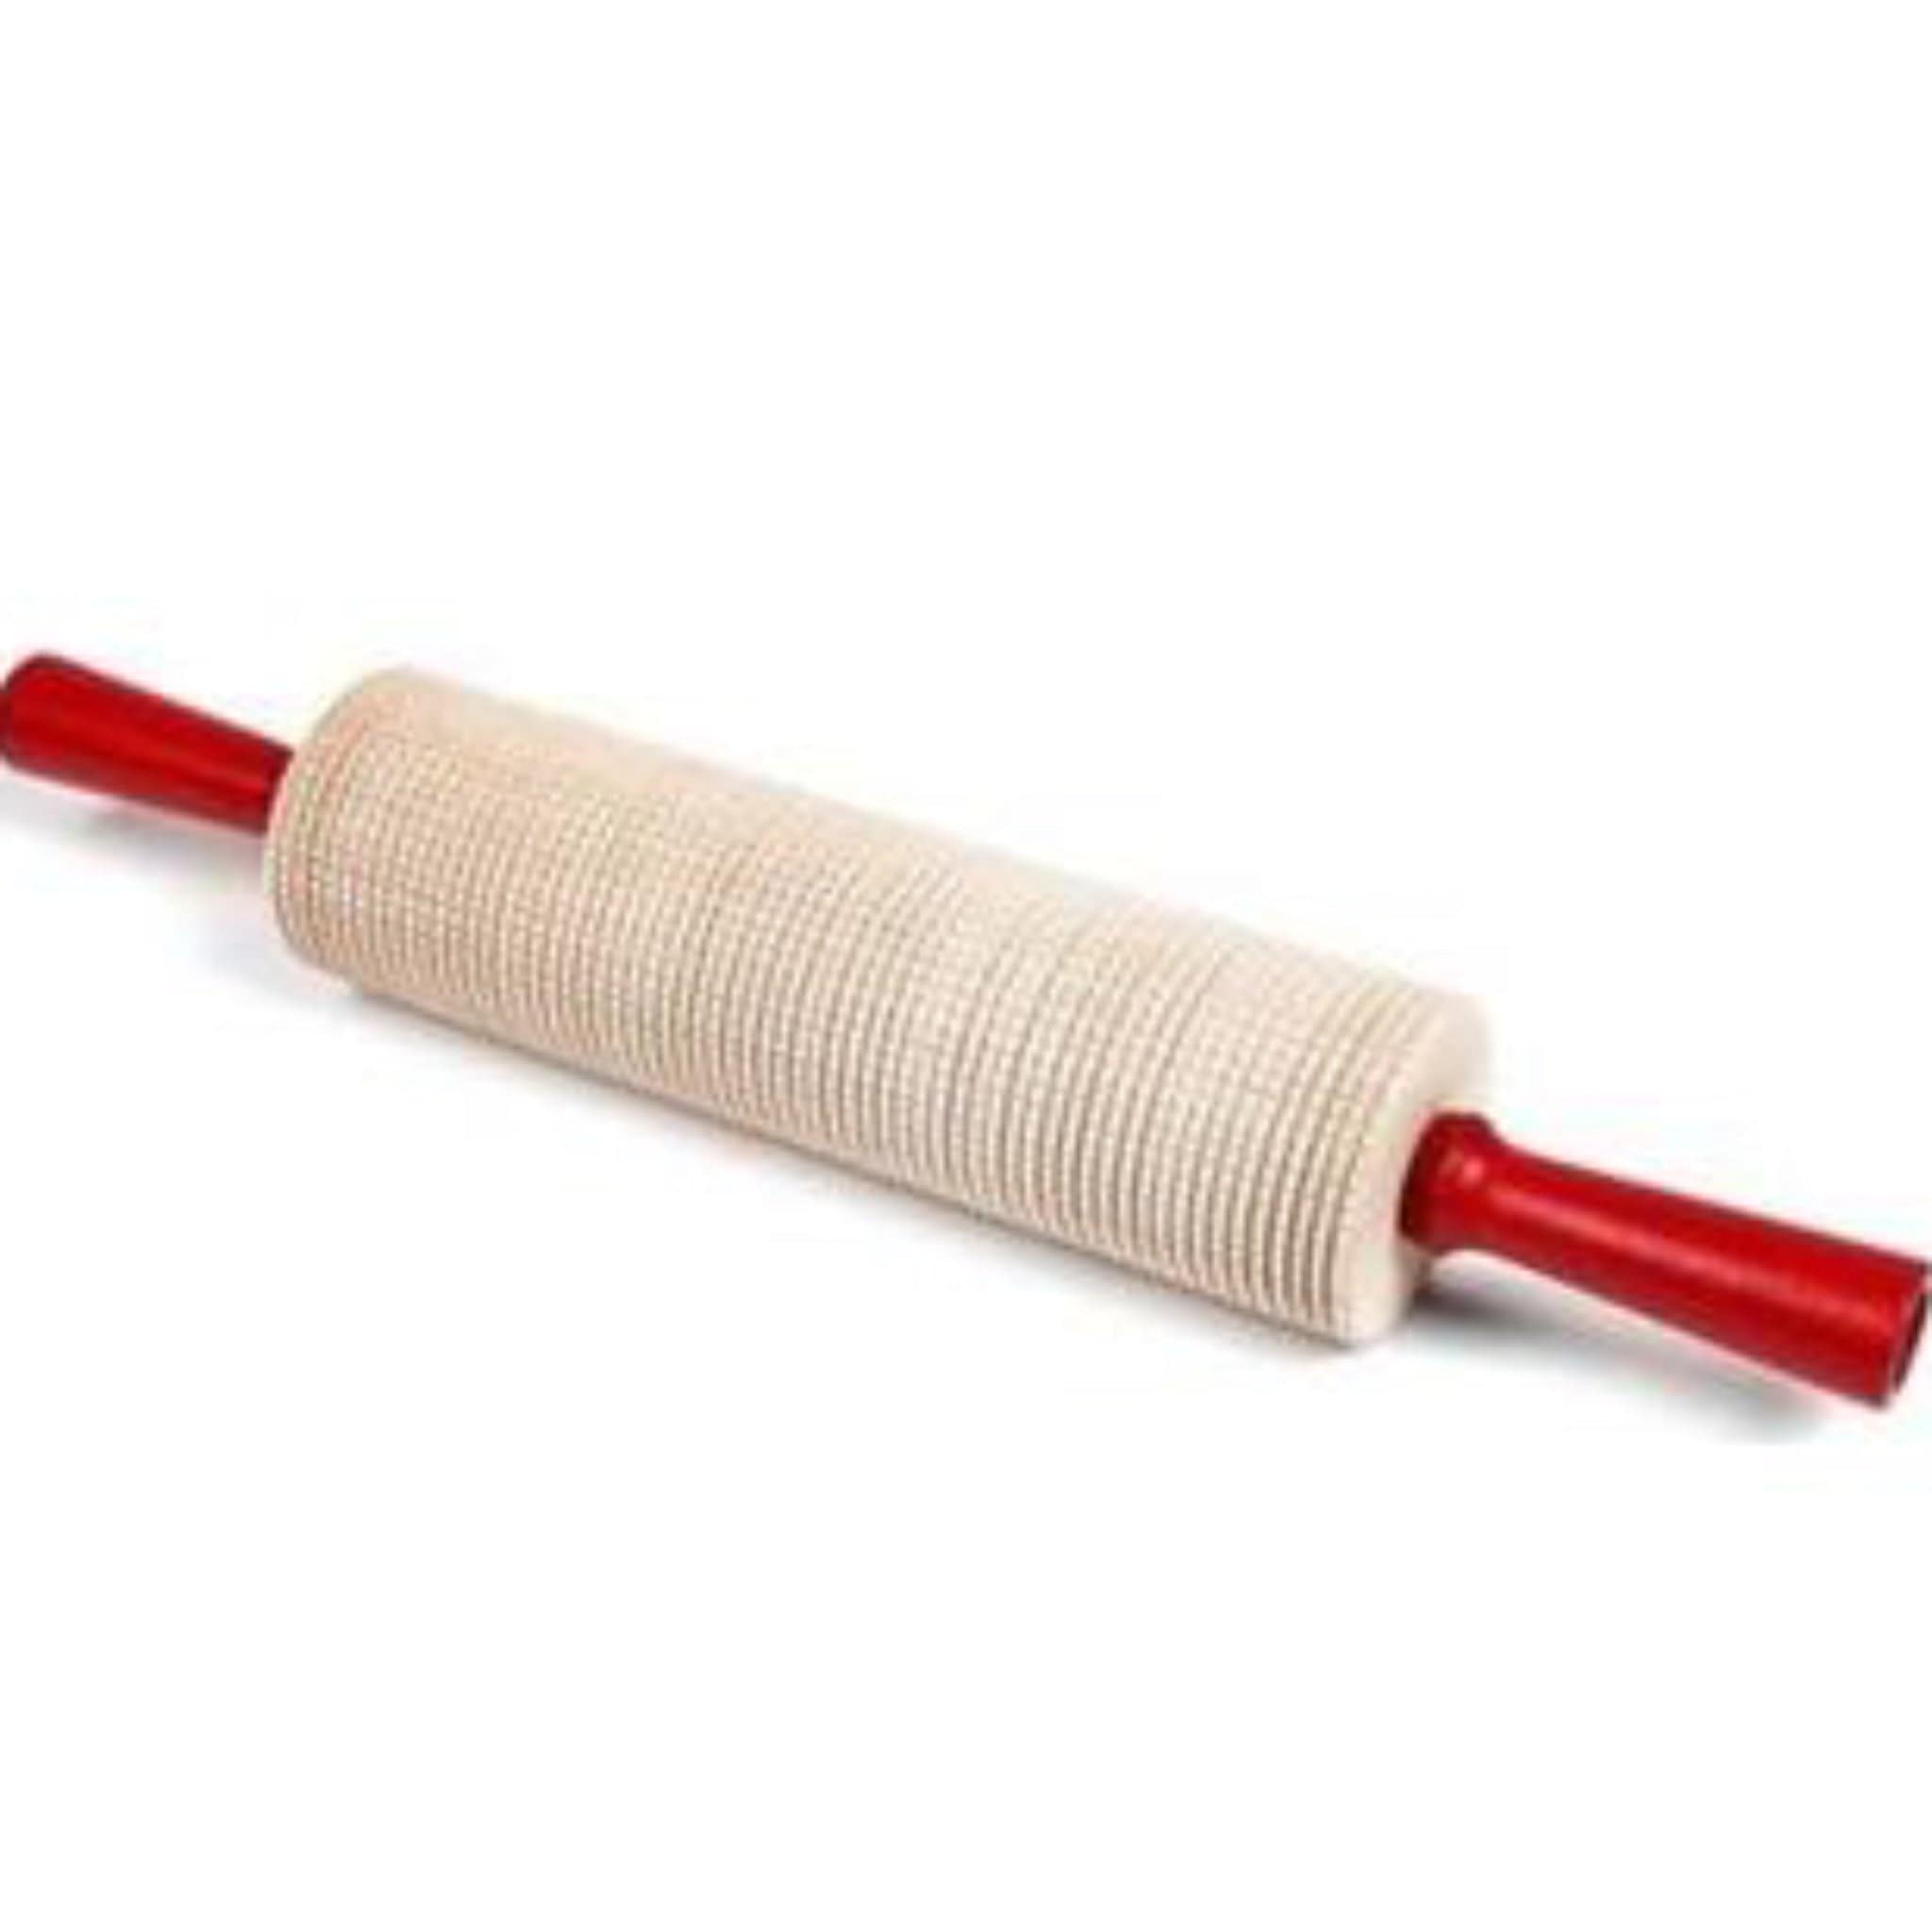  Frieling Crafted in the USA Maple Rolling Pin Grande Rolling  Pin with Handles, 2.75-Inch by 15-Inch Barrel: Home & Kitchen